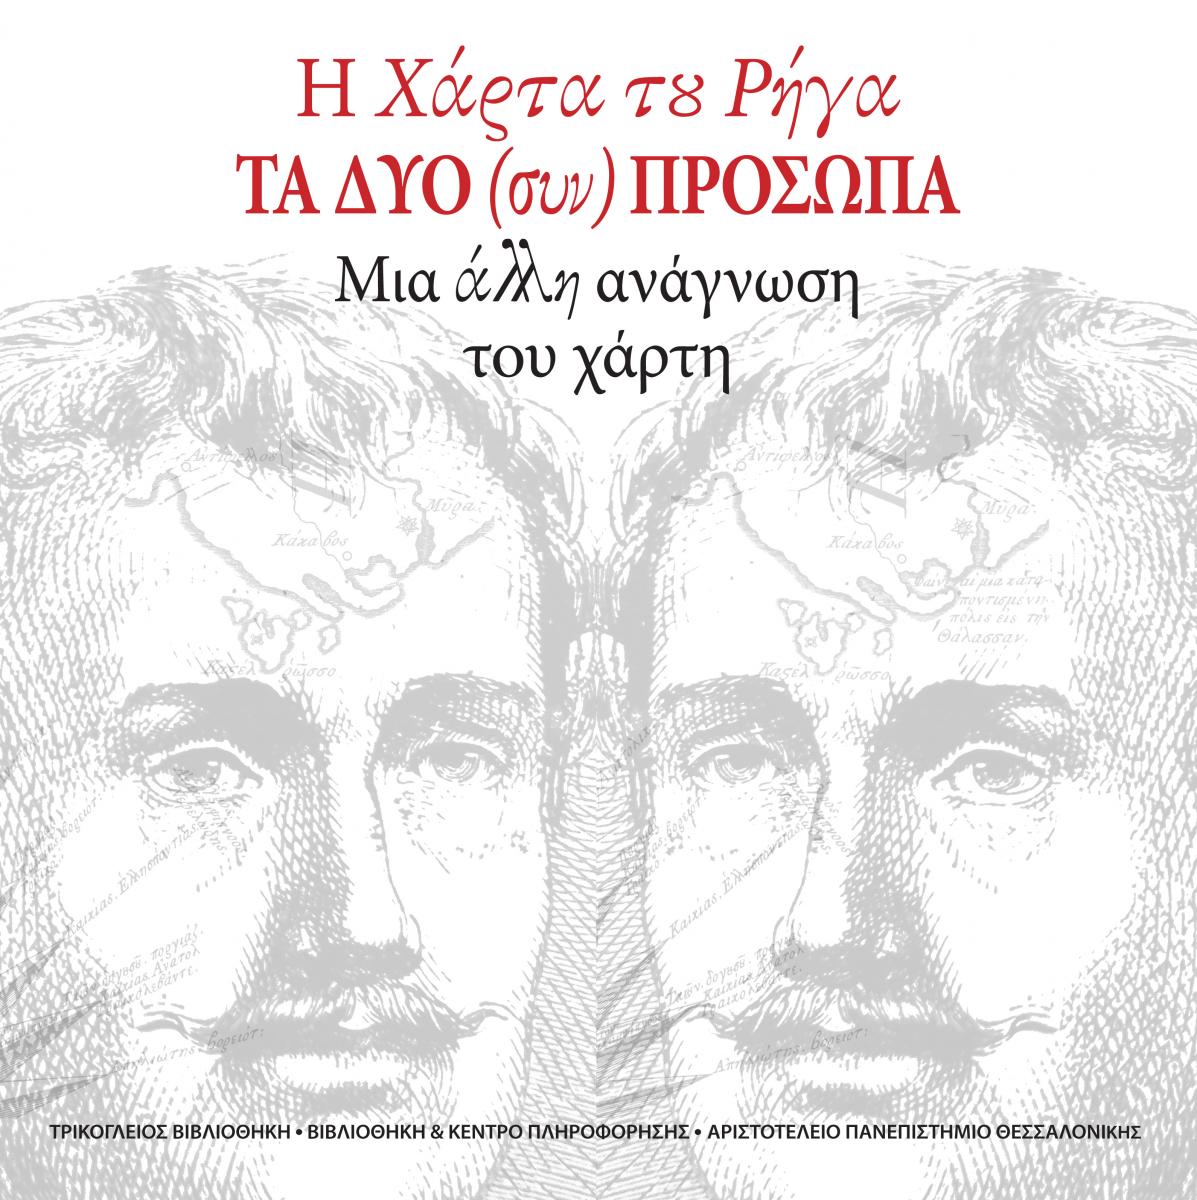 Cover of the publication "The Righas' Carta".